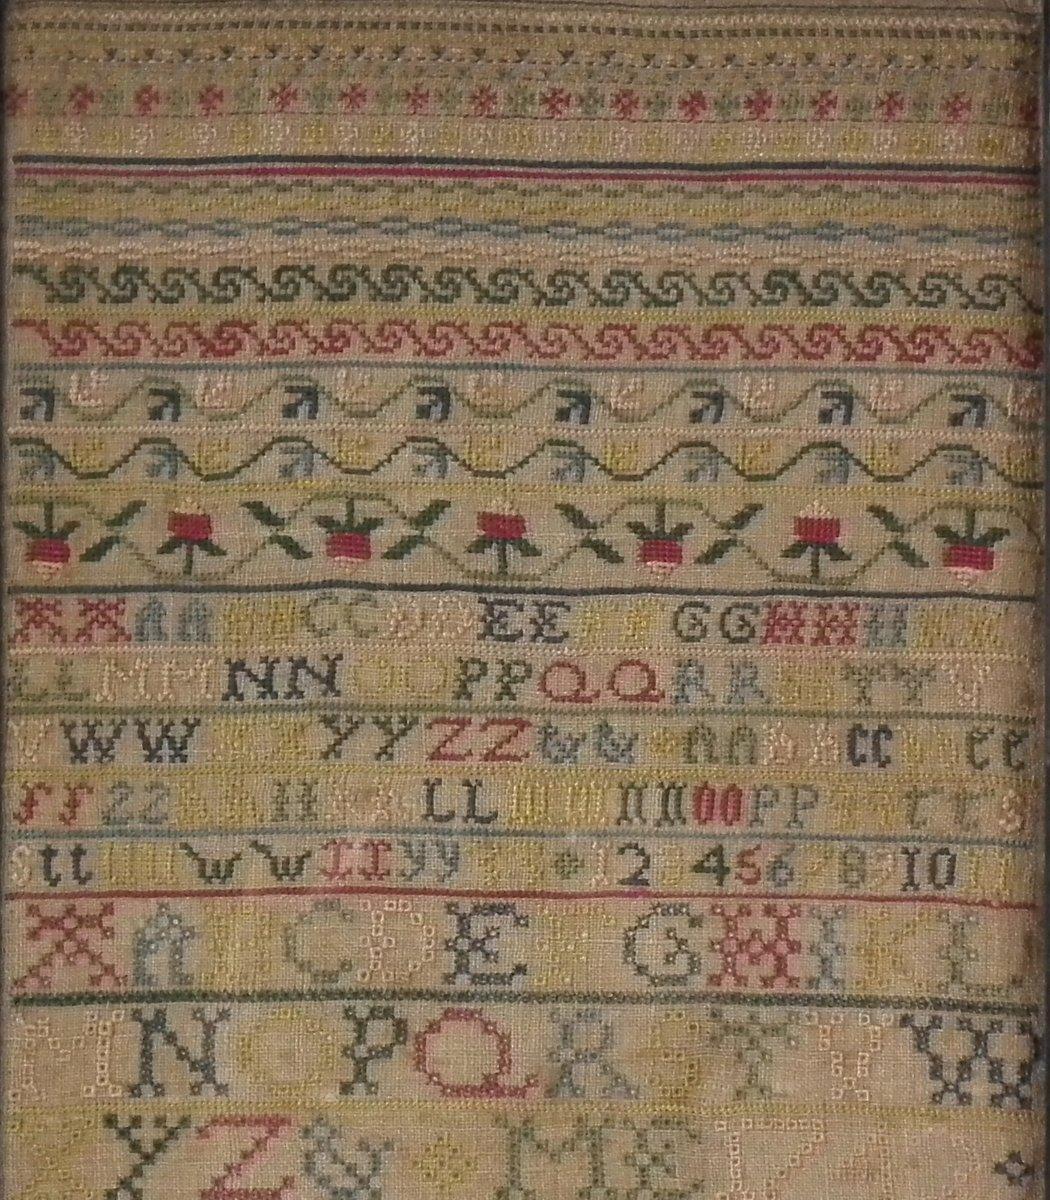 Antique Sampler, 1742 Verse sampler by Mary Ellicott. The sampler is worked in silk on linen ground, in cross stitch and Algerian eye. No border, divider lines in various patterns. Colors red, cream, yellow, pink, greens and blues. Alphabets A-Z in